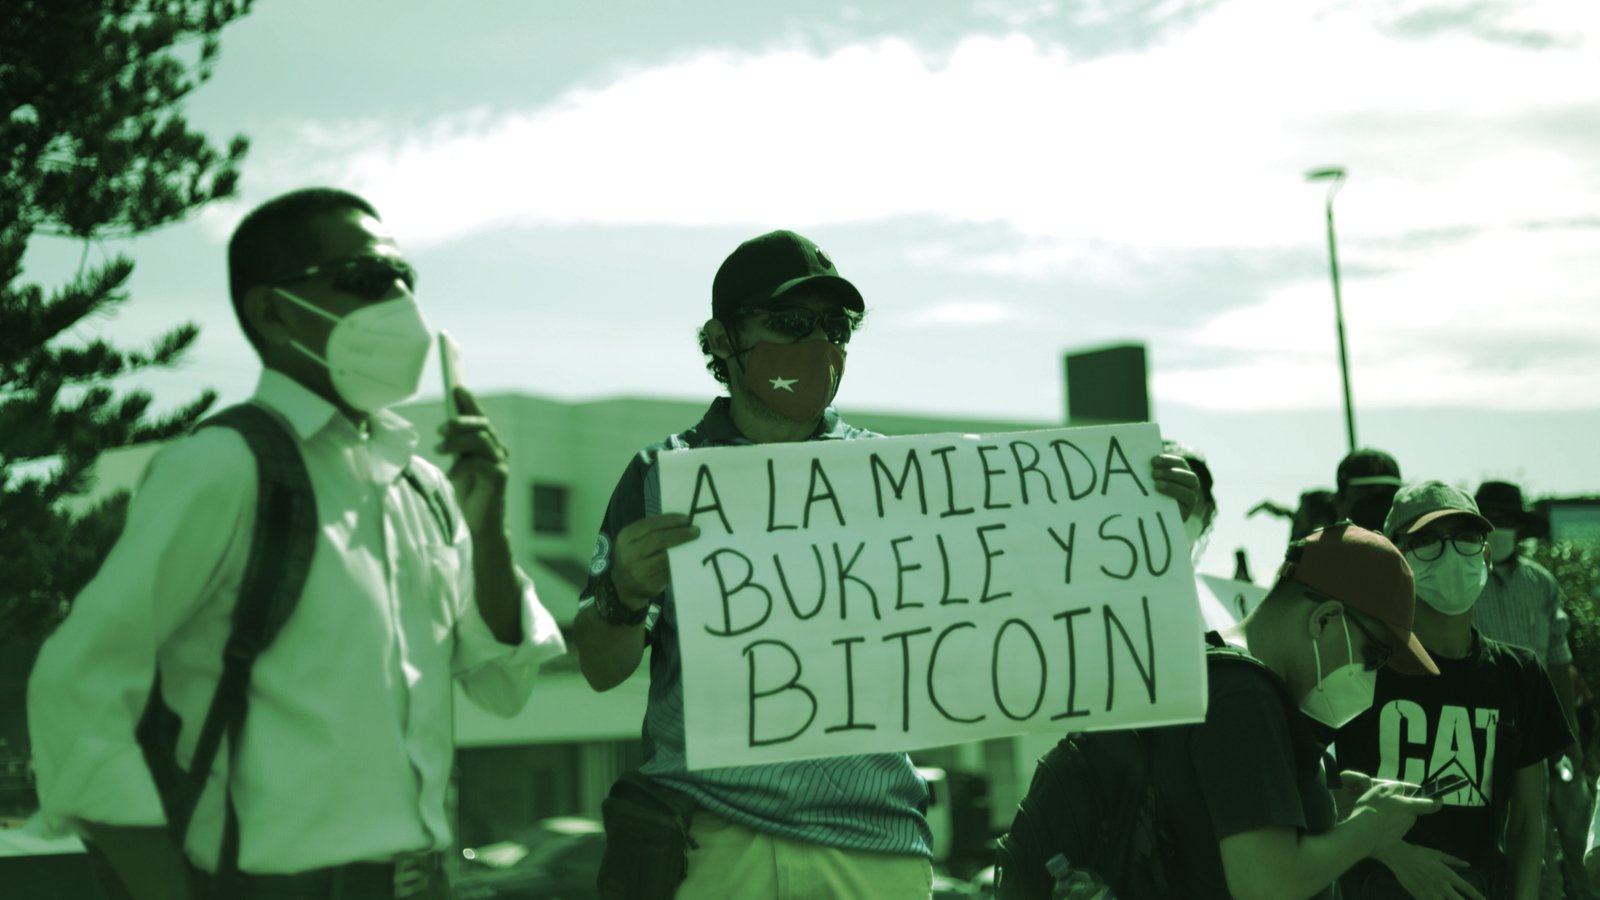 El Salvador Forced Through Its Bitcoin Law by Any Means Necessary